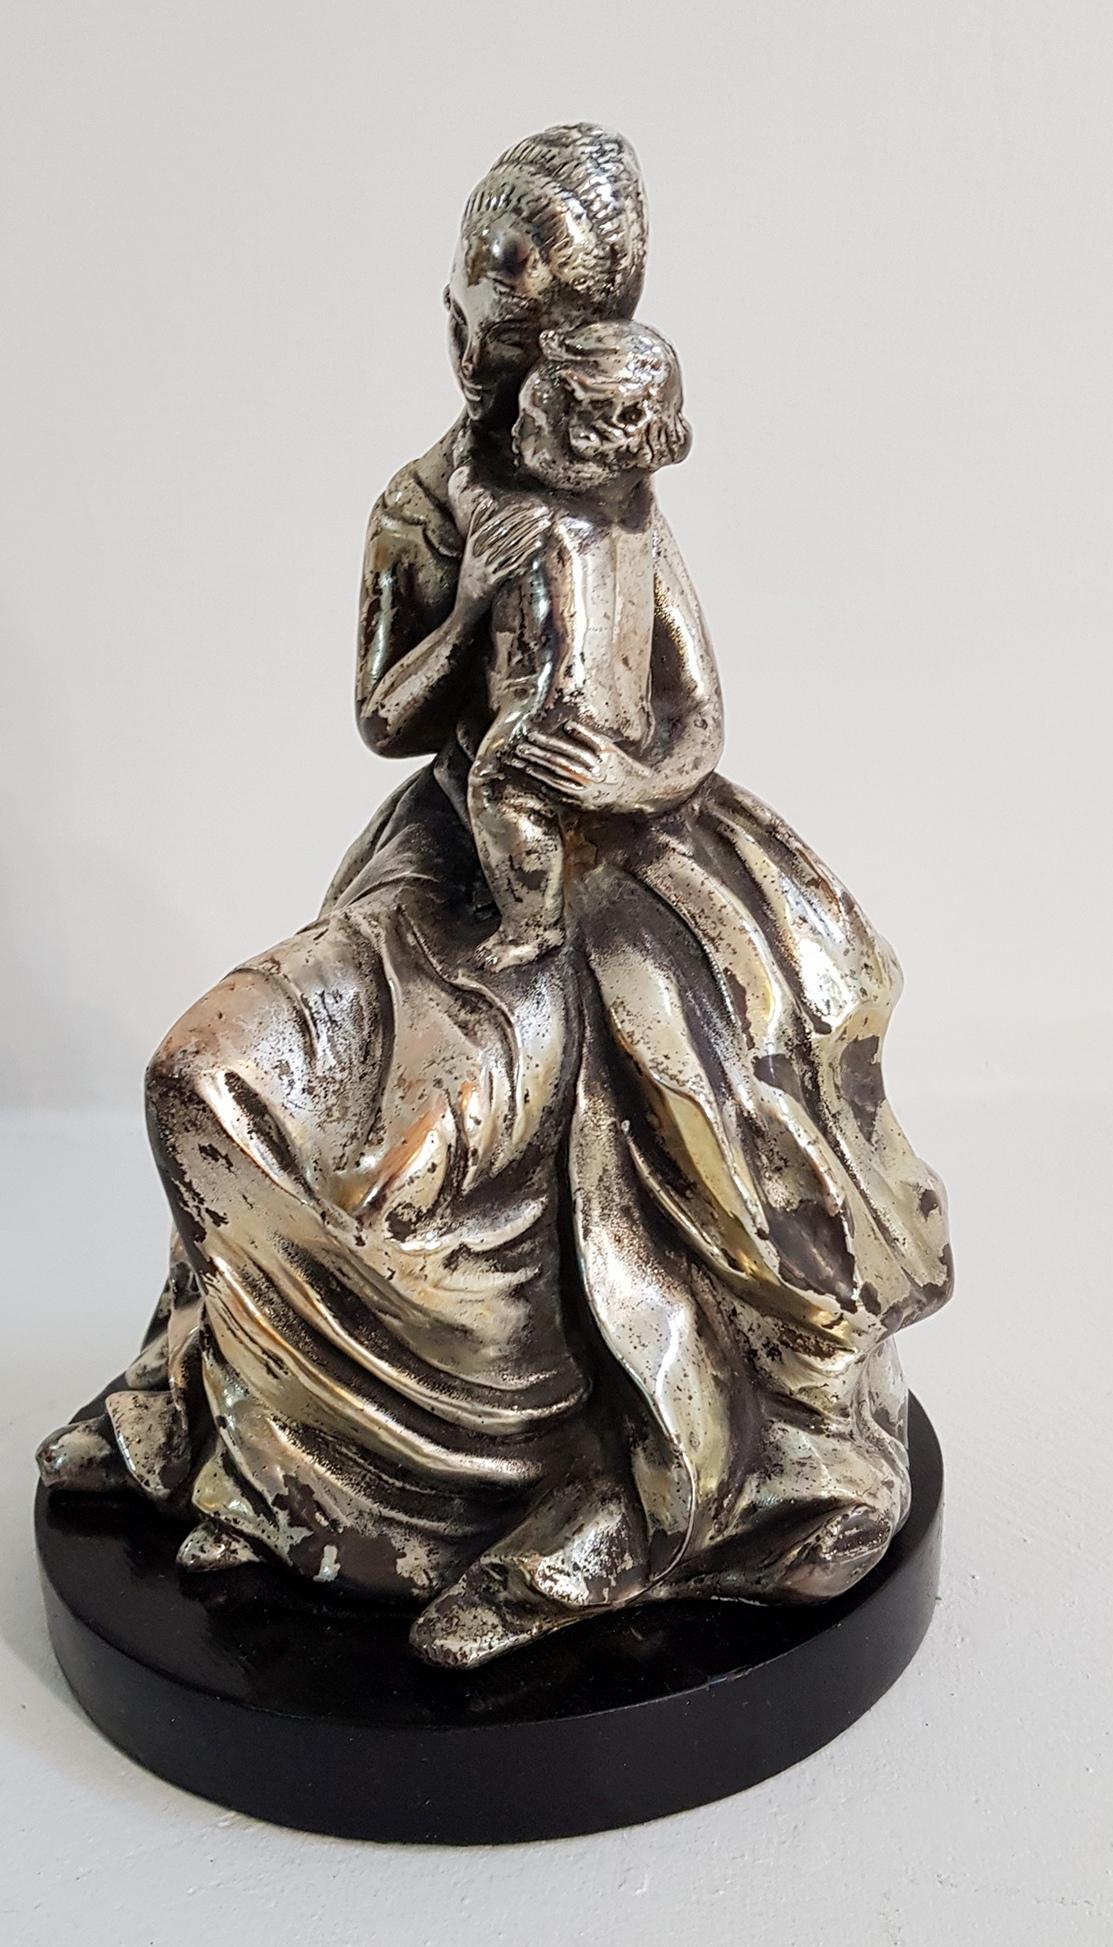 Figurine depicting mother and child by Guido Cacciapuoti. The figurine stands on a black wood base and the figurine is made from terracotta and then silverplated.